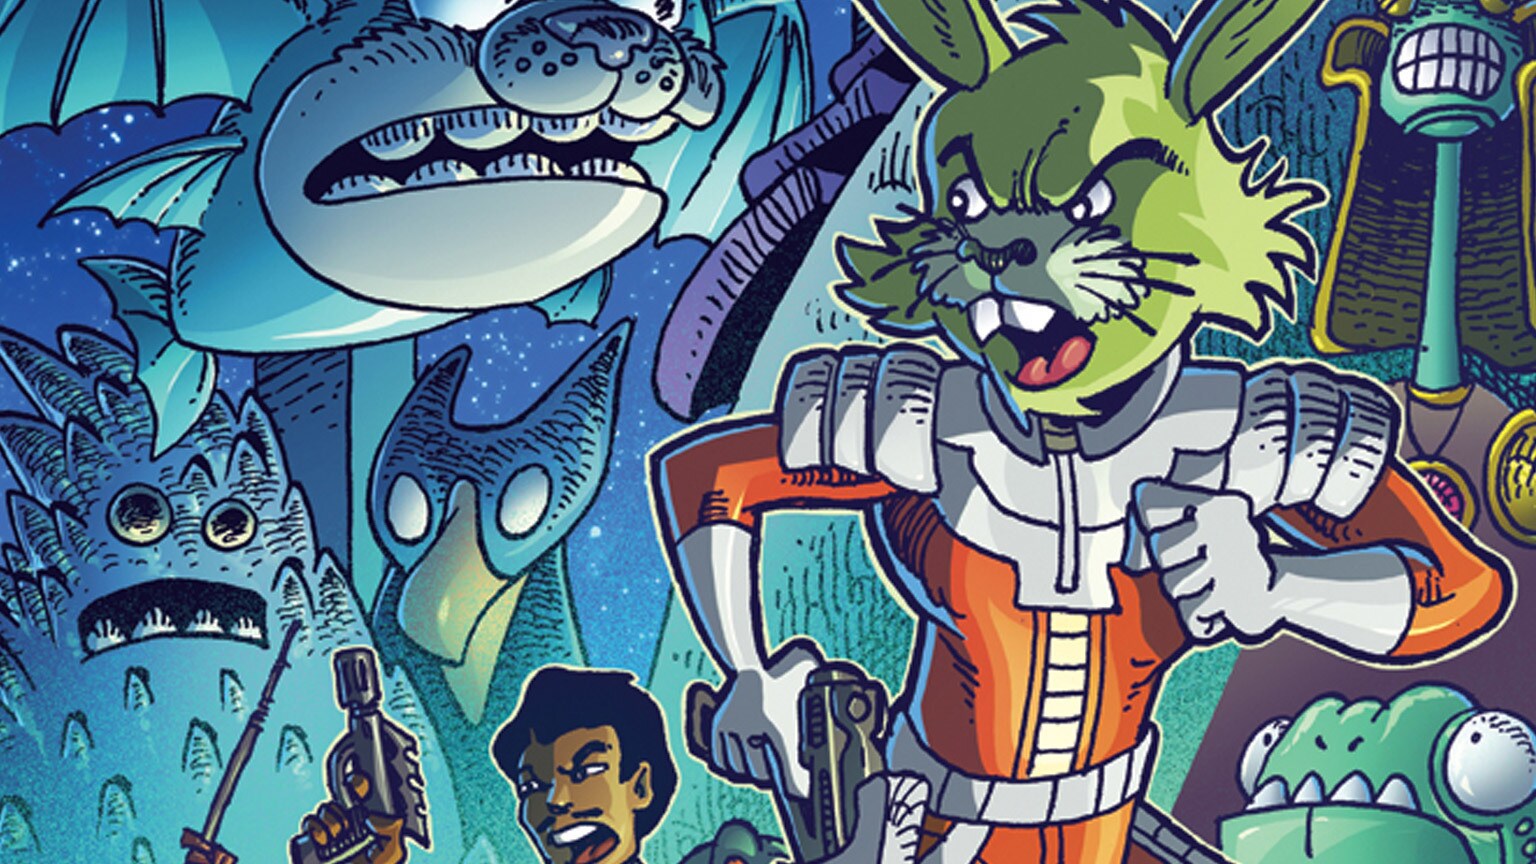 SWCC 2019: New Tales from Vader's Castle Series Announced, Jaxxon Returns, and More from the IDW Publishing Panel